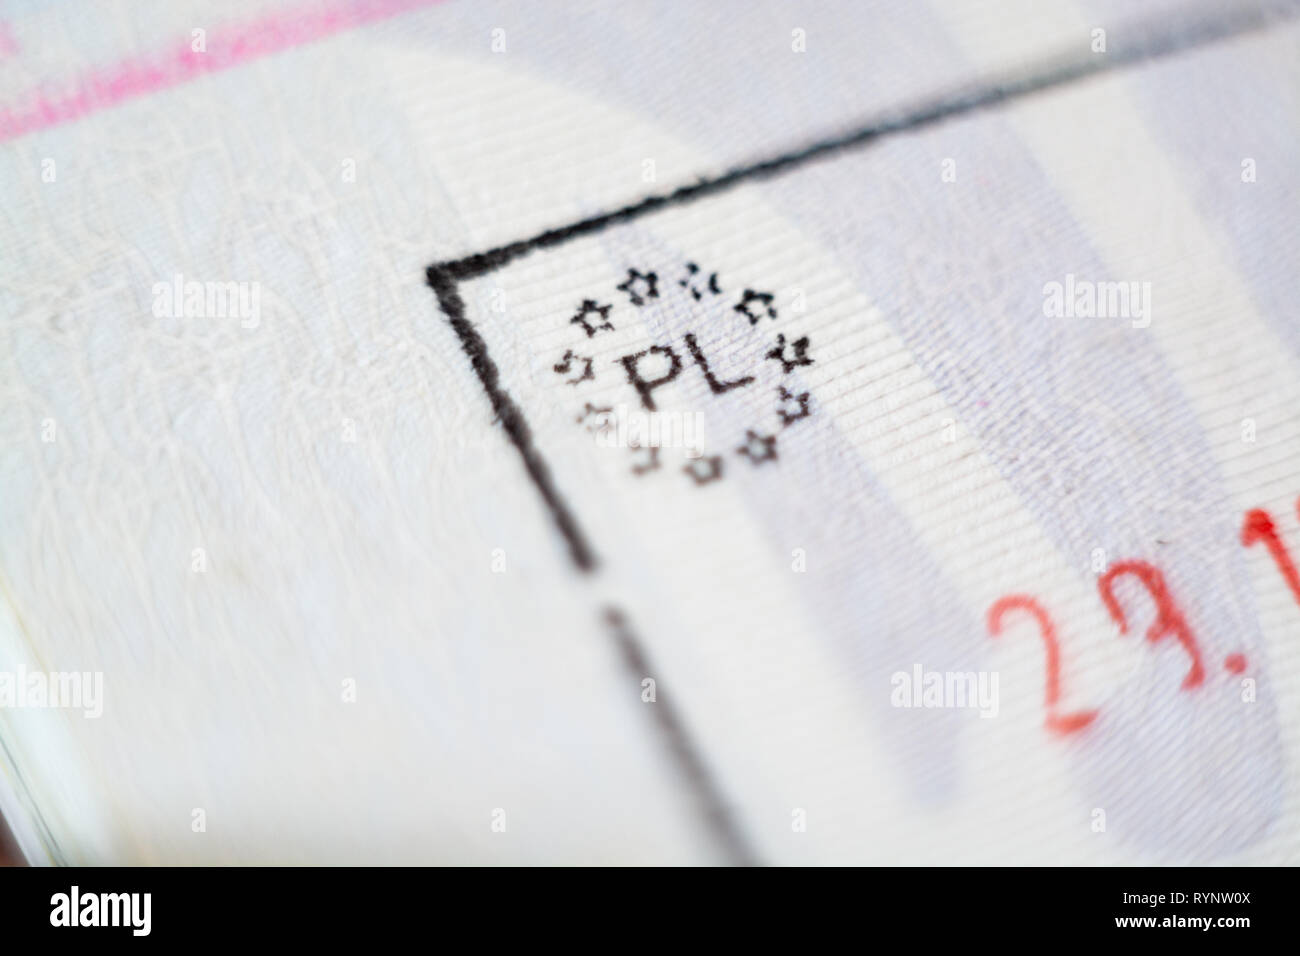 Close-up macro detail of European Union border control customs admission stamp with exit symbol in focus and Poland country marking sign Stock Photo